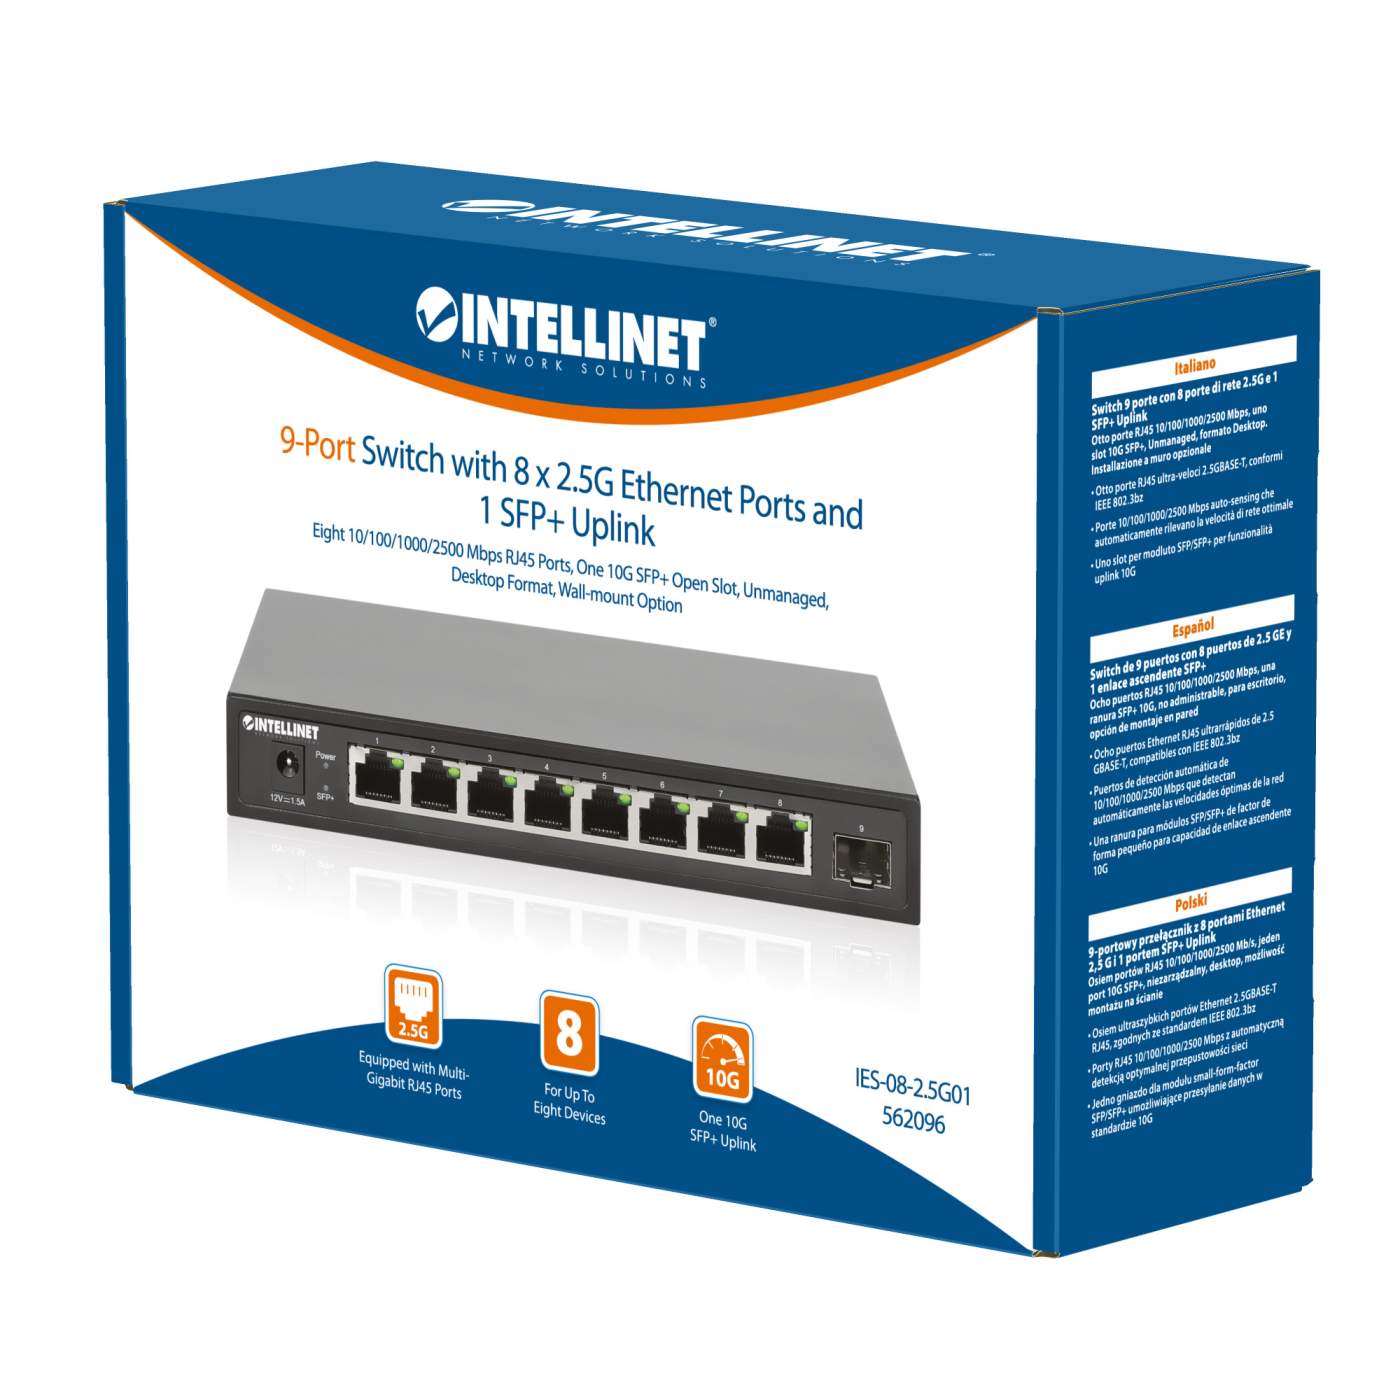 9-Port Switch with 8 x 2.5G Ethernet Ports and 1 SFP+ Uplink Packaging Image 2